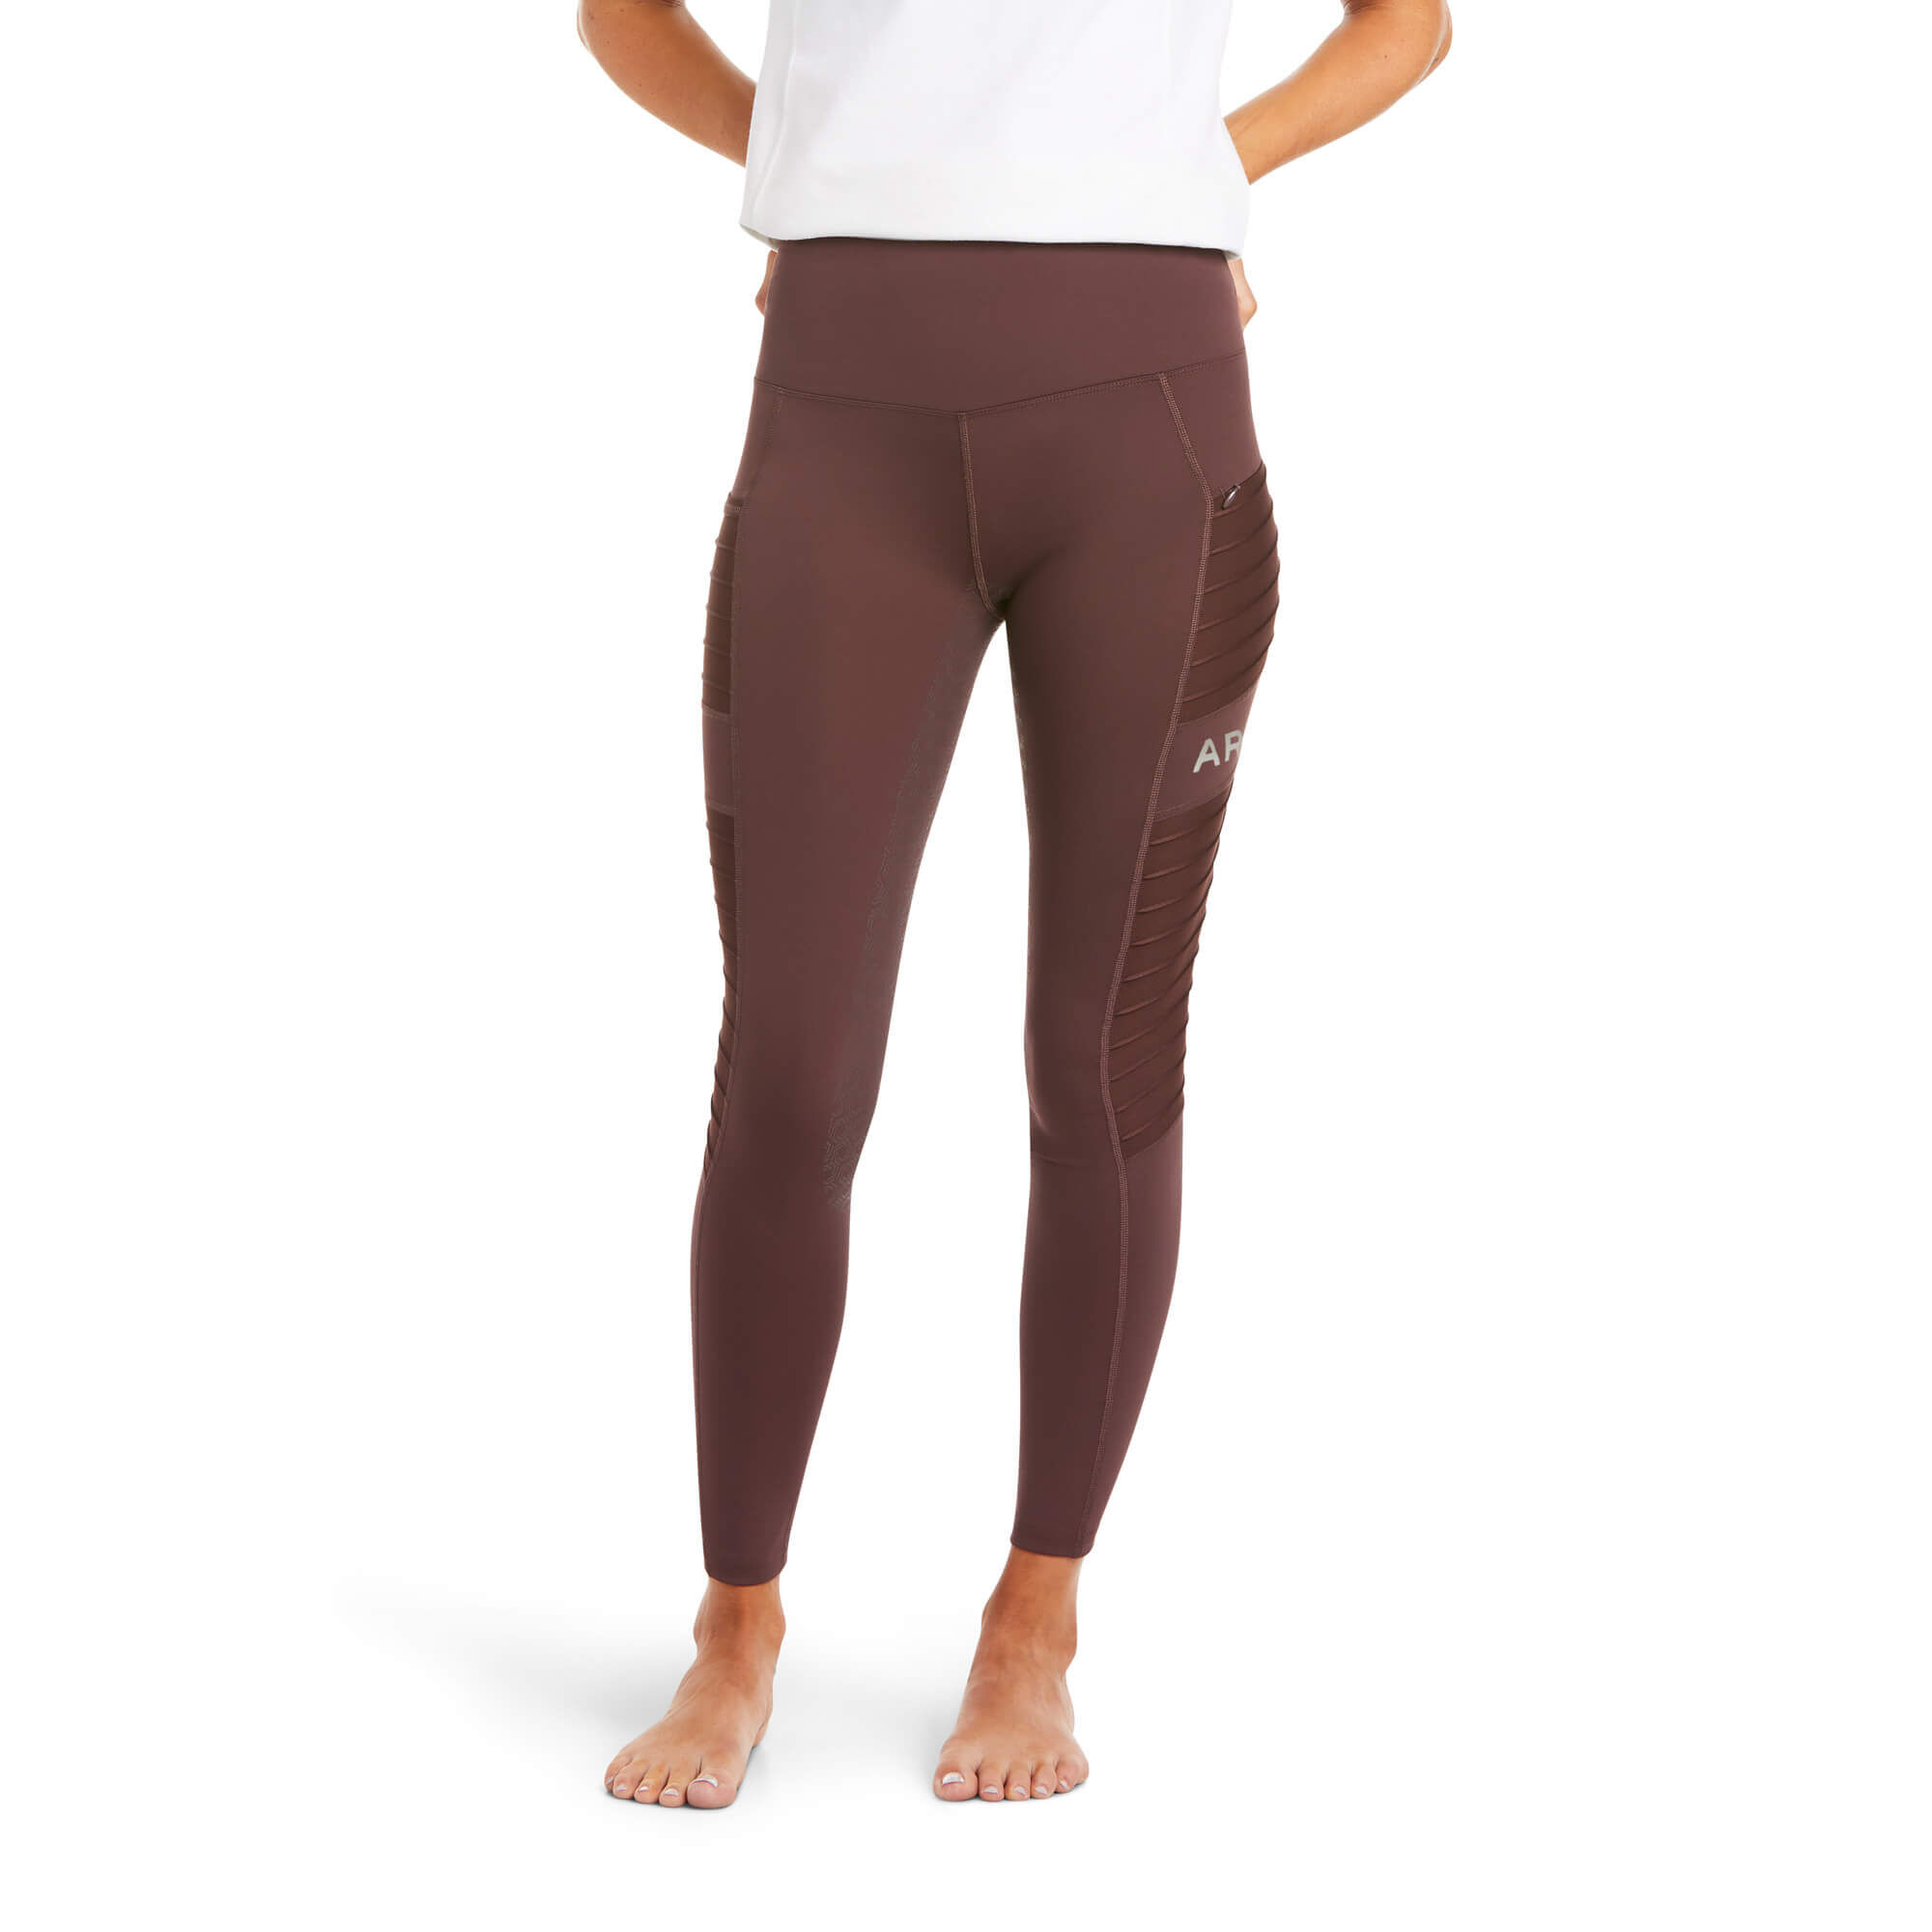 Cocoa All Sizes Ariat Eos Moto Knee Patch Womens Pants Riding Tights 